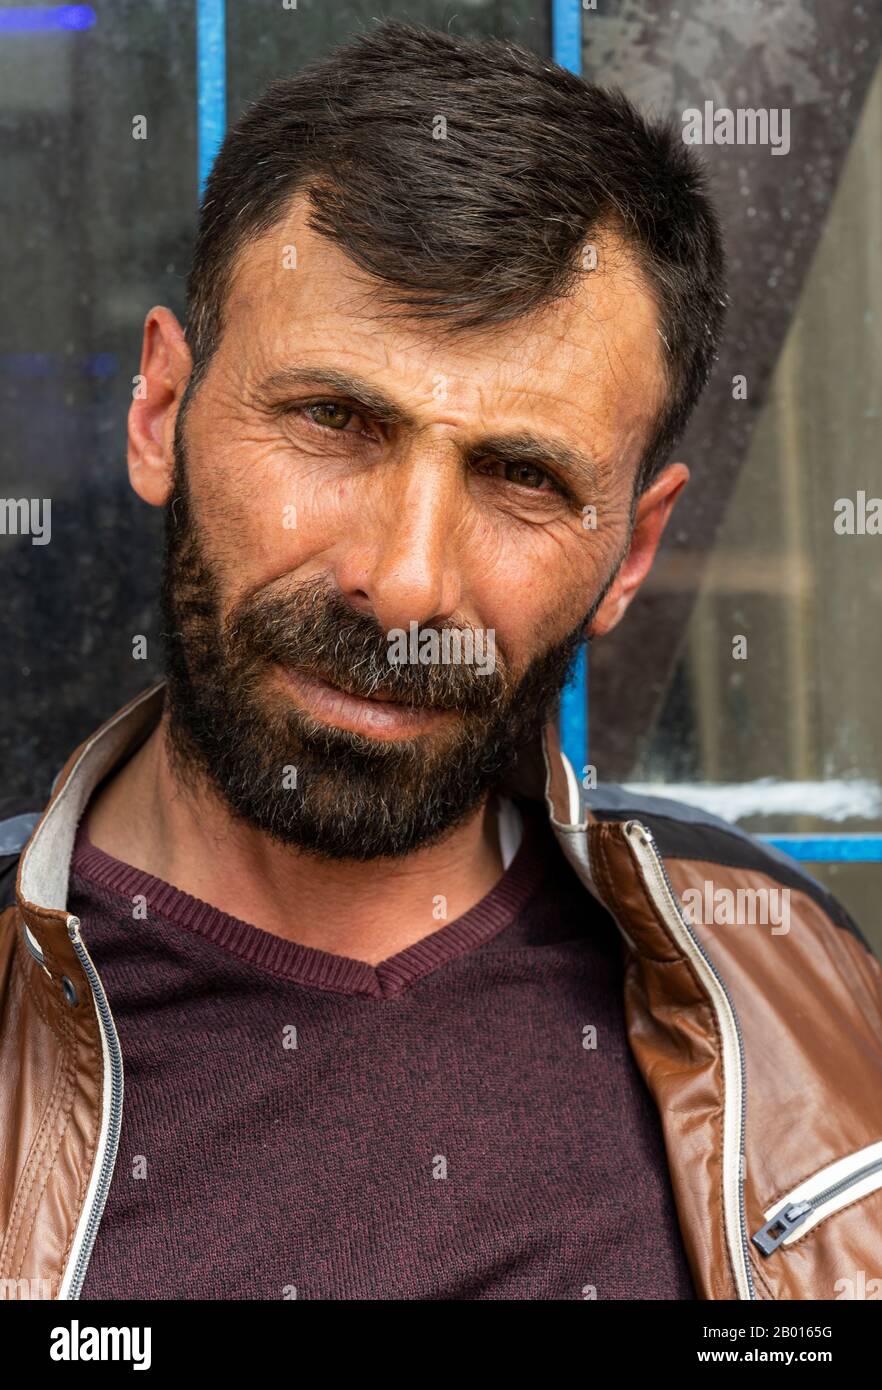 Susuz, Turkey - May 9, 2019: Turkish man with hat, moustache and beard in a turkish cafe. Stock Photo